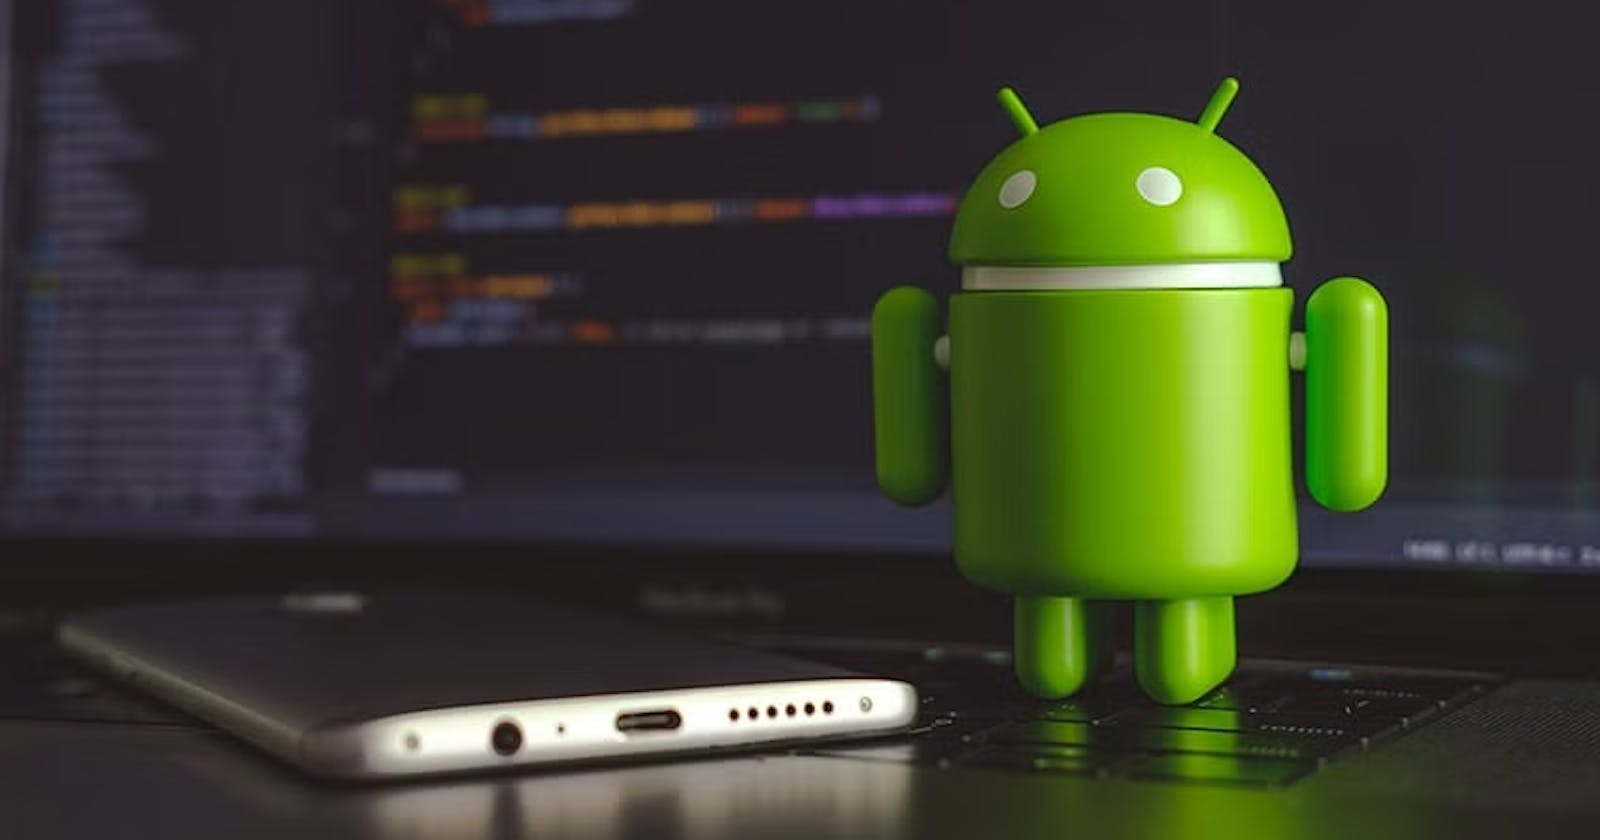 Building a Contact List App on Android: A step-by-step Guide